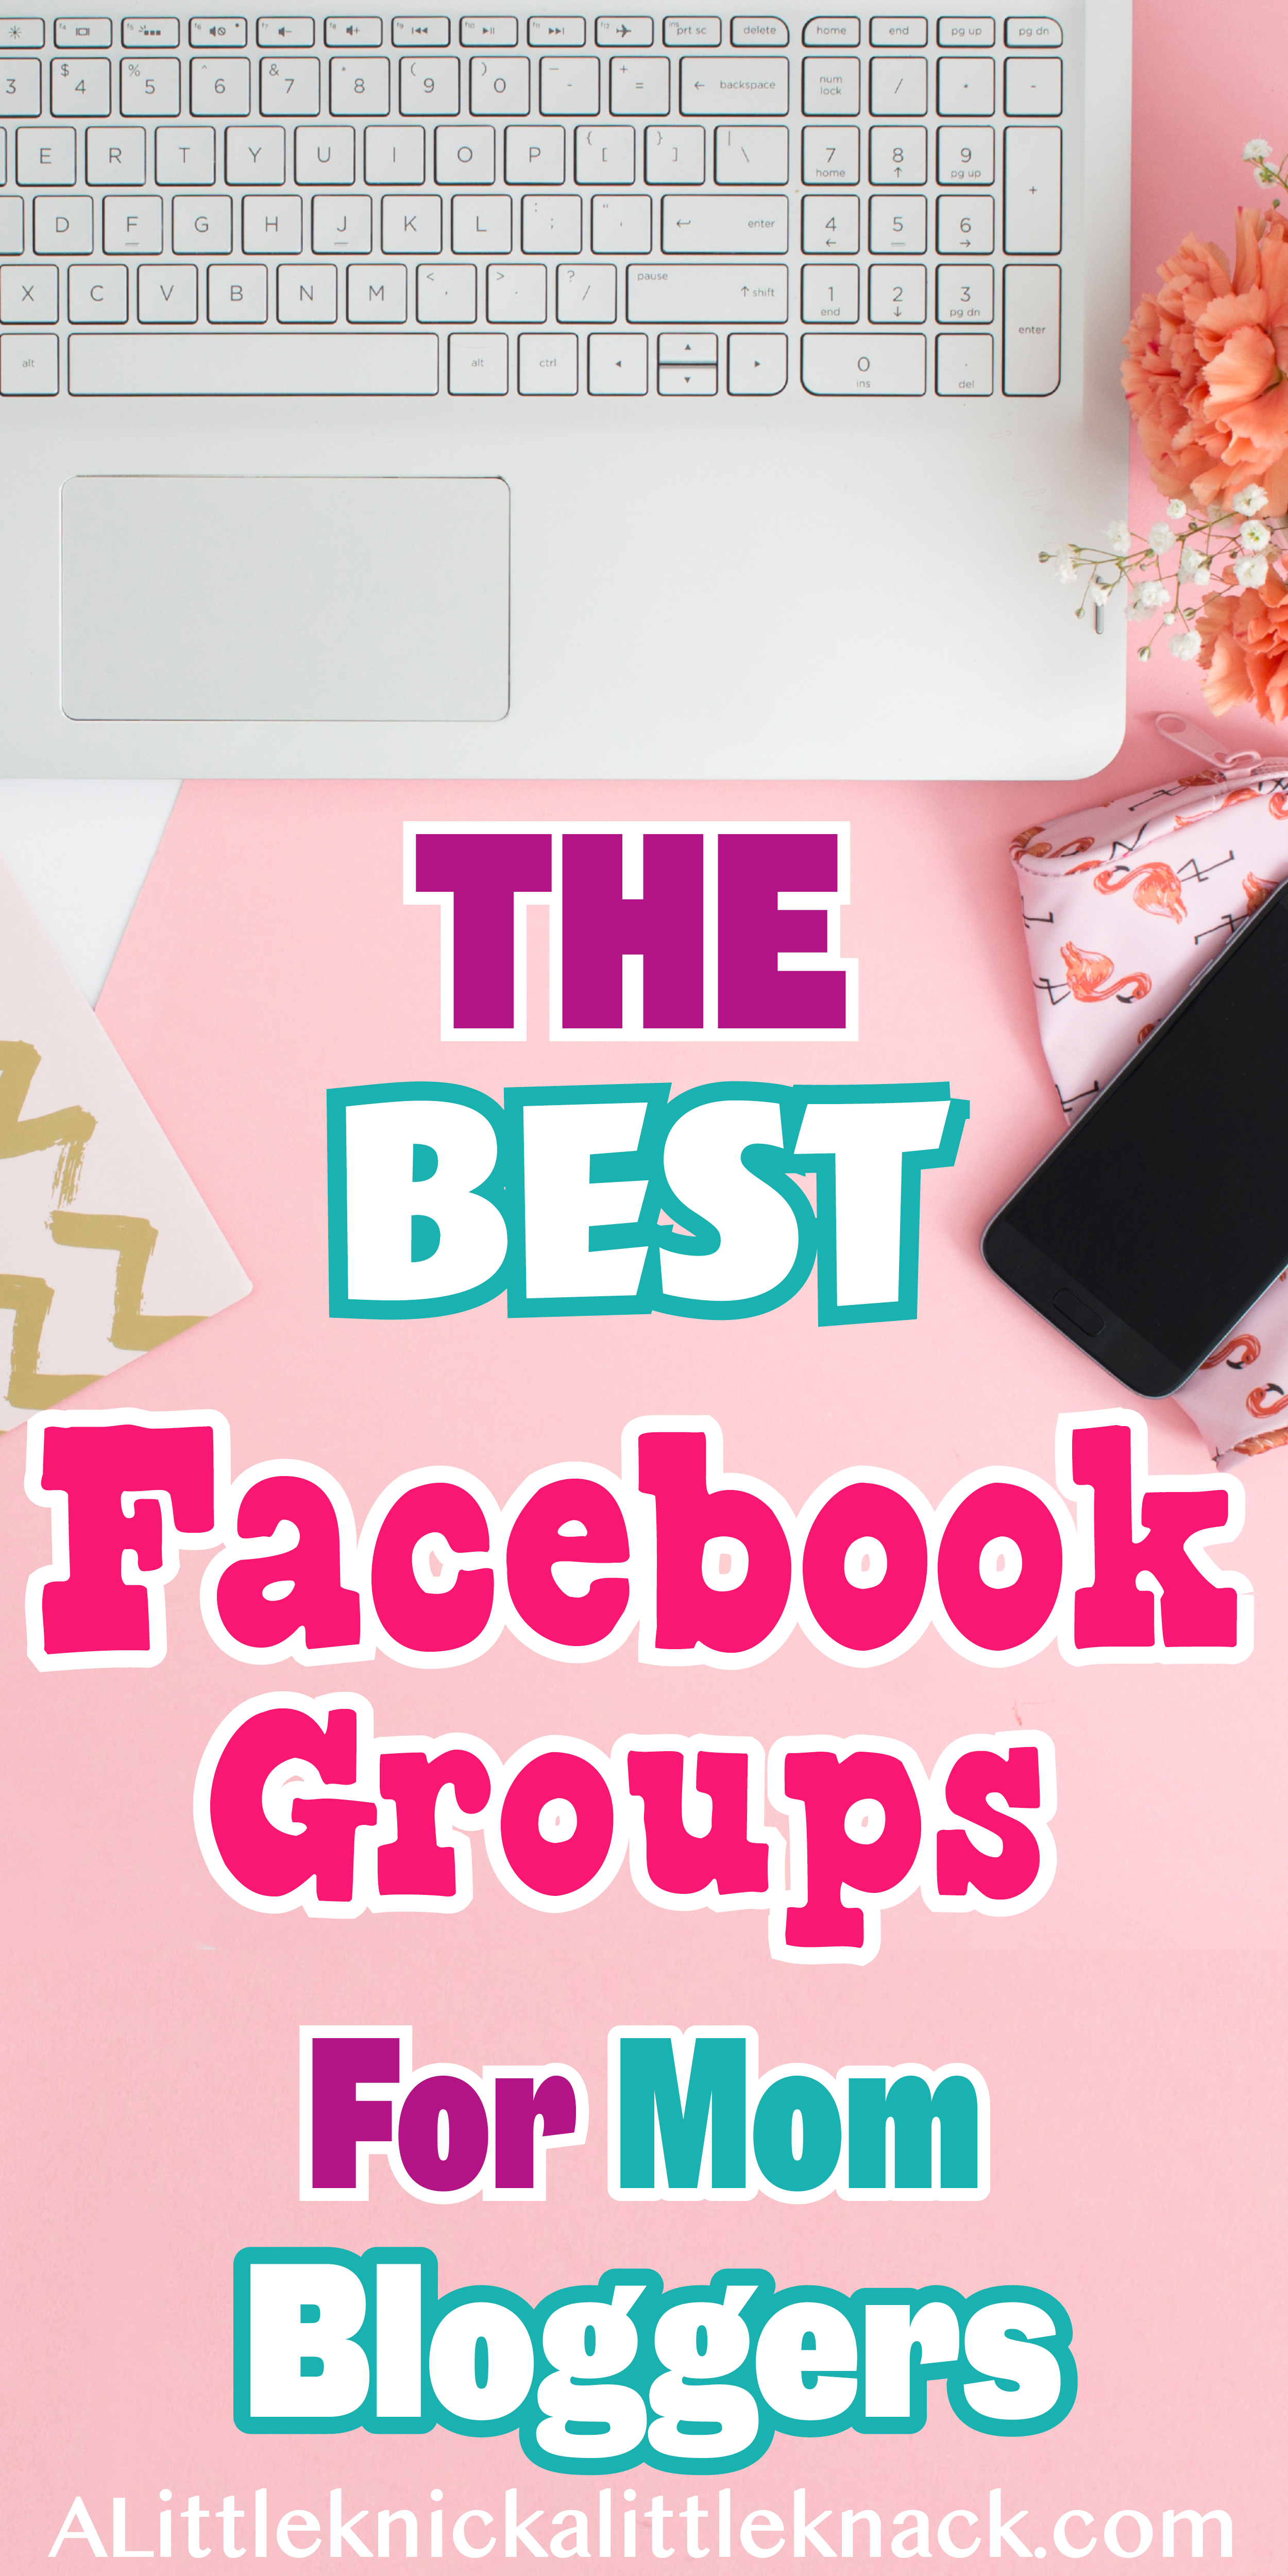 The best blogging advice is a few clicks away with these 5 amazing blogging groups! #blog